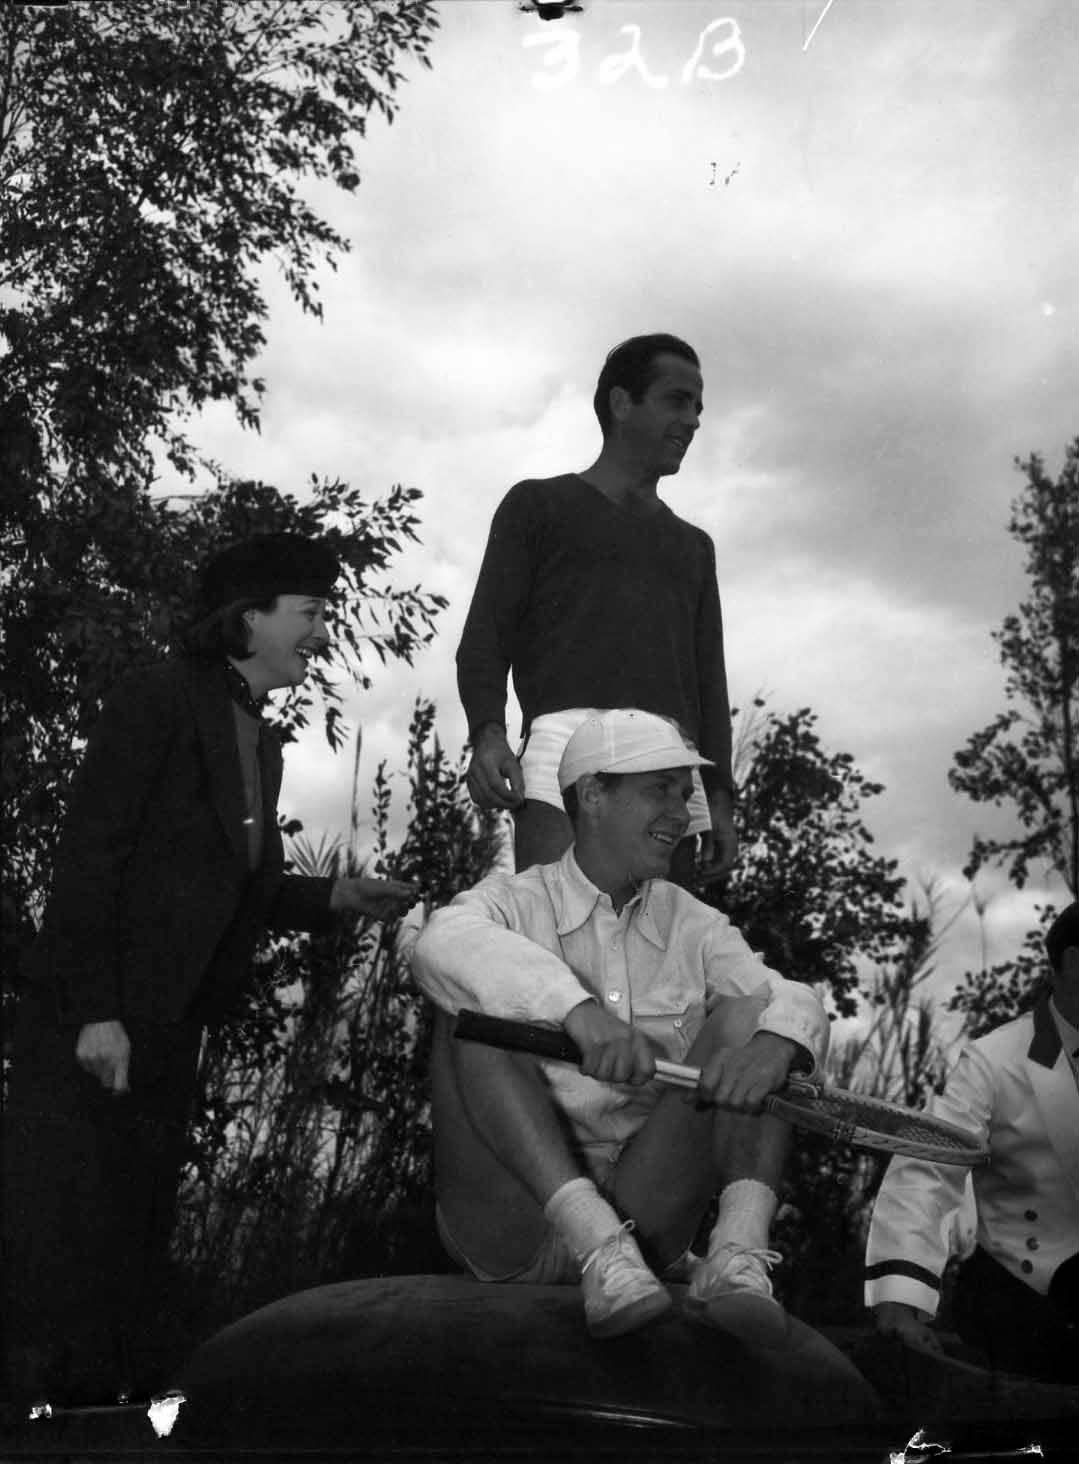 Humphrey Bogart played Marlowe and also visited the desert. Here he stands above Burgess Meredith and Virginia Farrell in 1938.